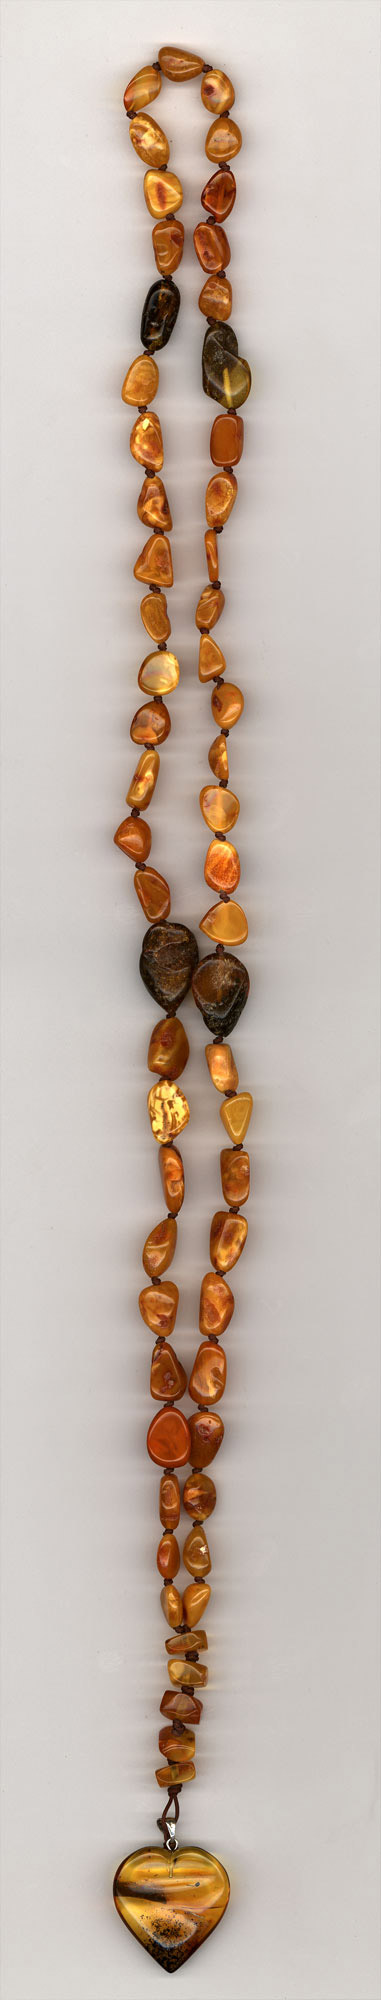 Catholic prayer object -Rosary- made og genuine amber from Baltic sea - cut by hand.